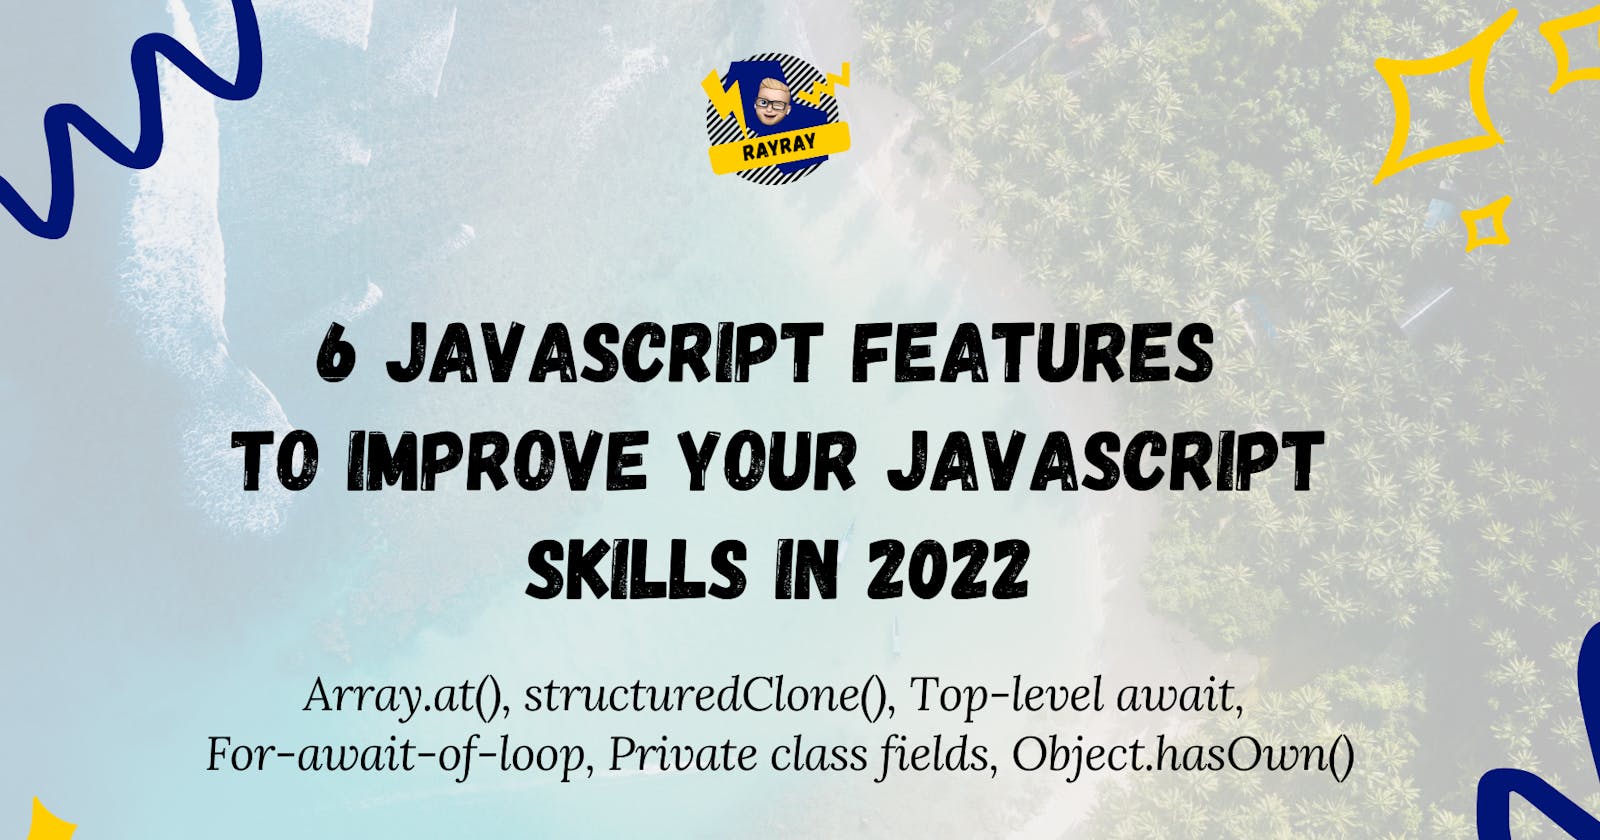 6 JavaScript Features to improve your JavaScript skills in 2022